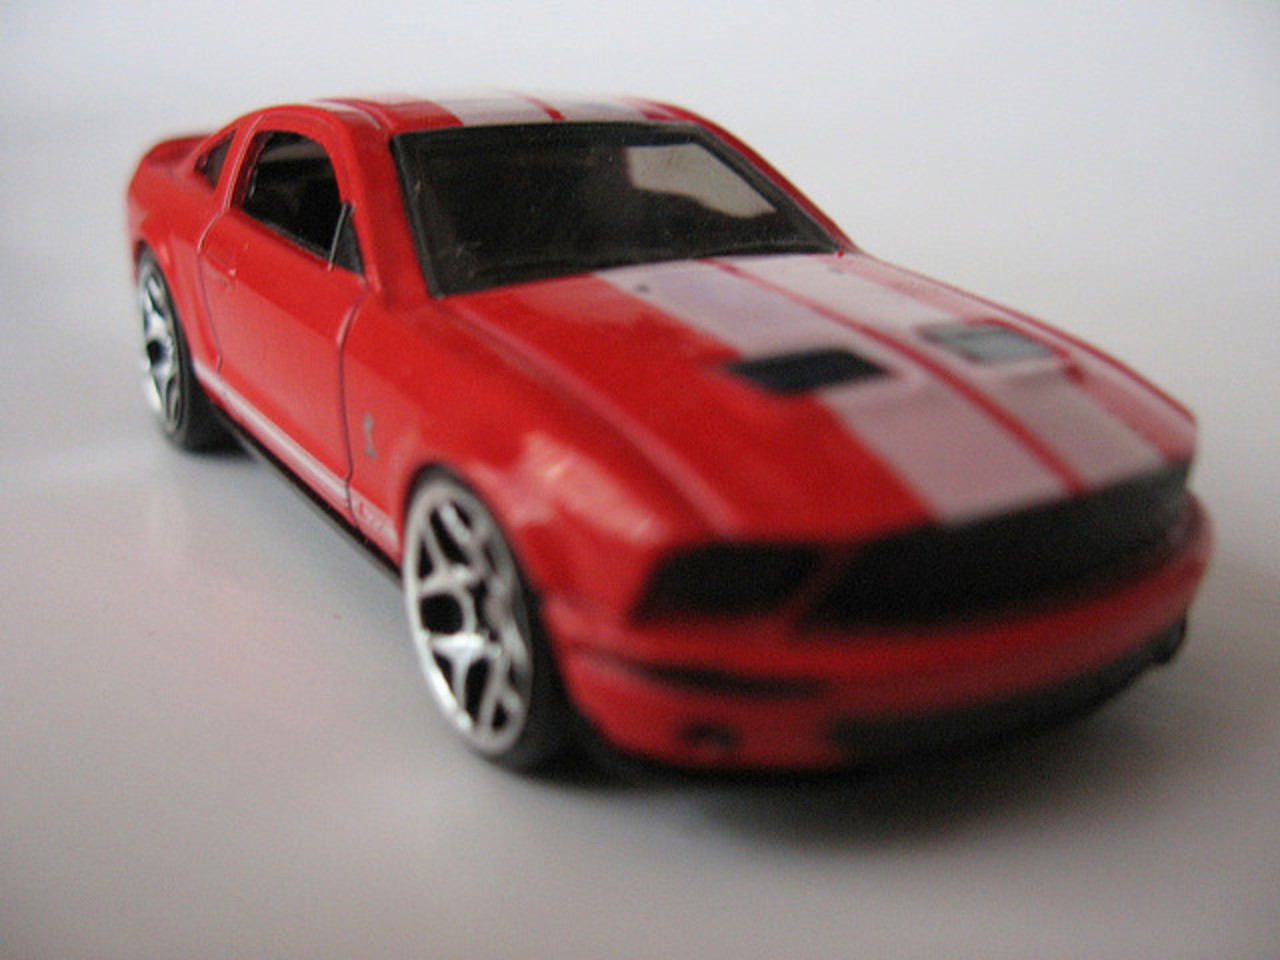 Ford Shelby GT-500 | Flickr - Photo Sharing!